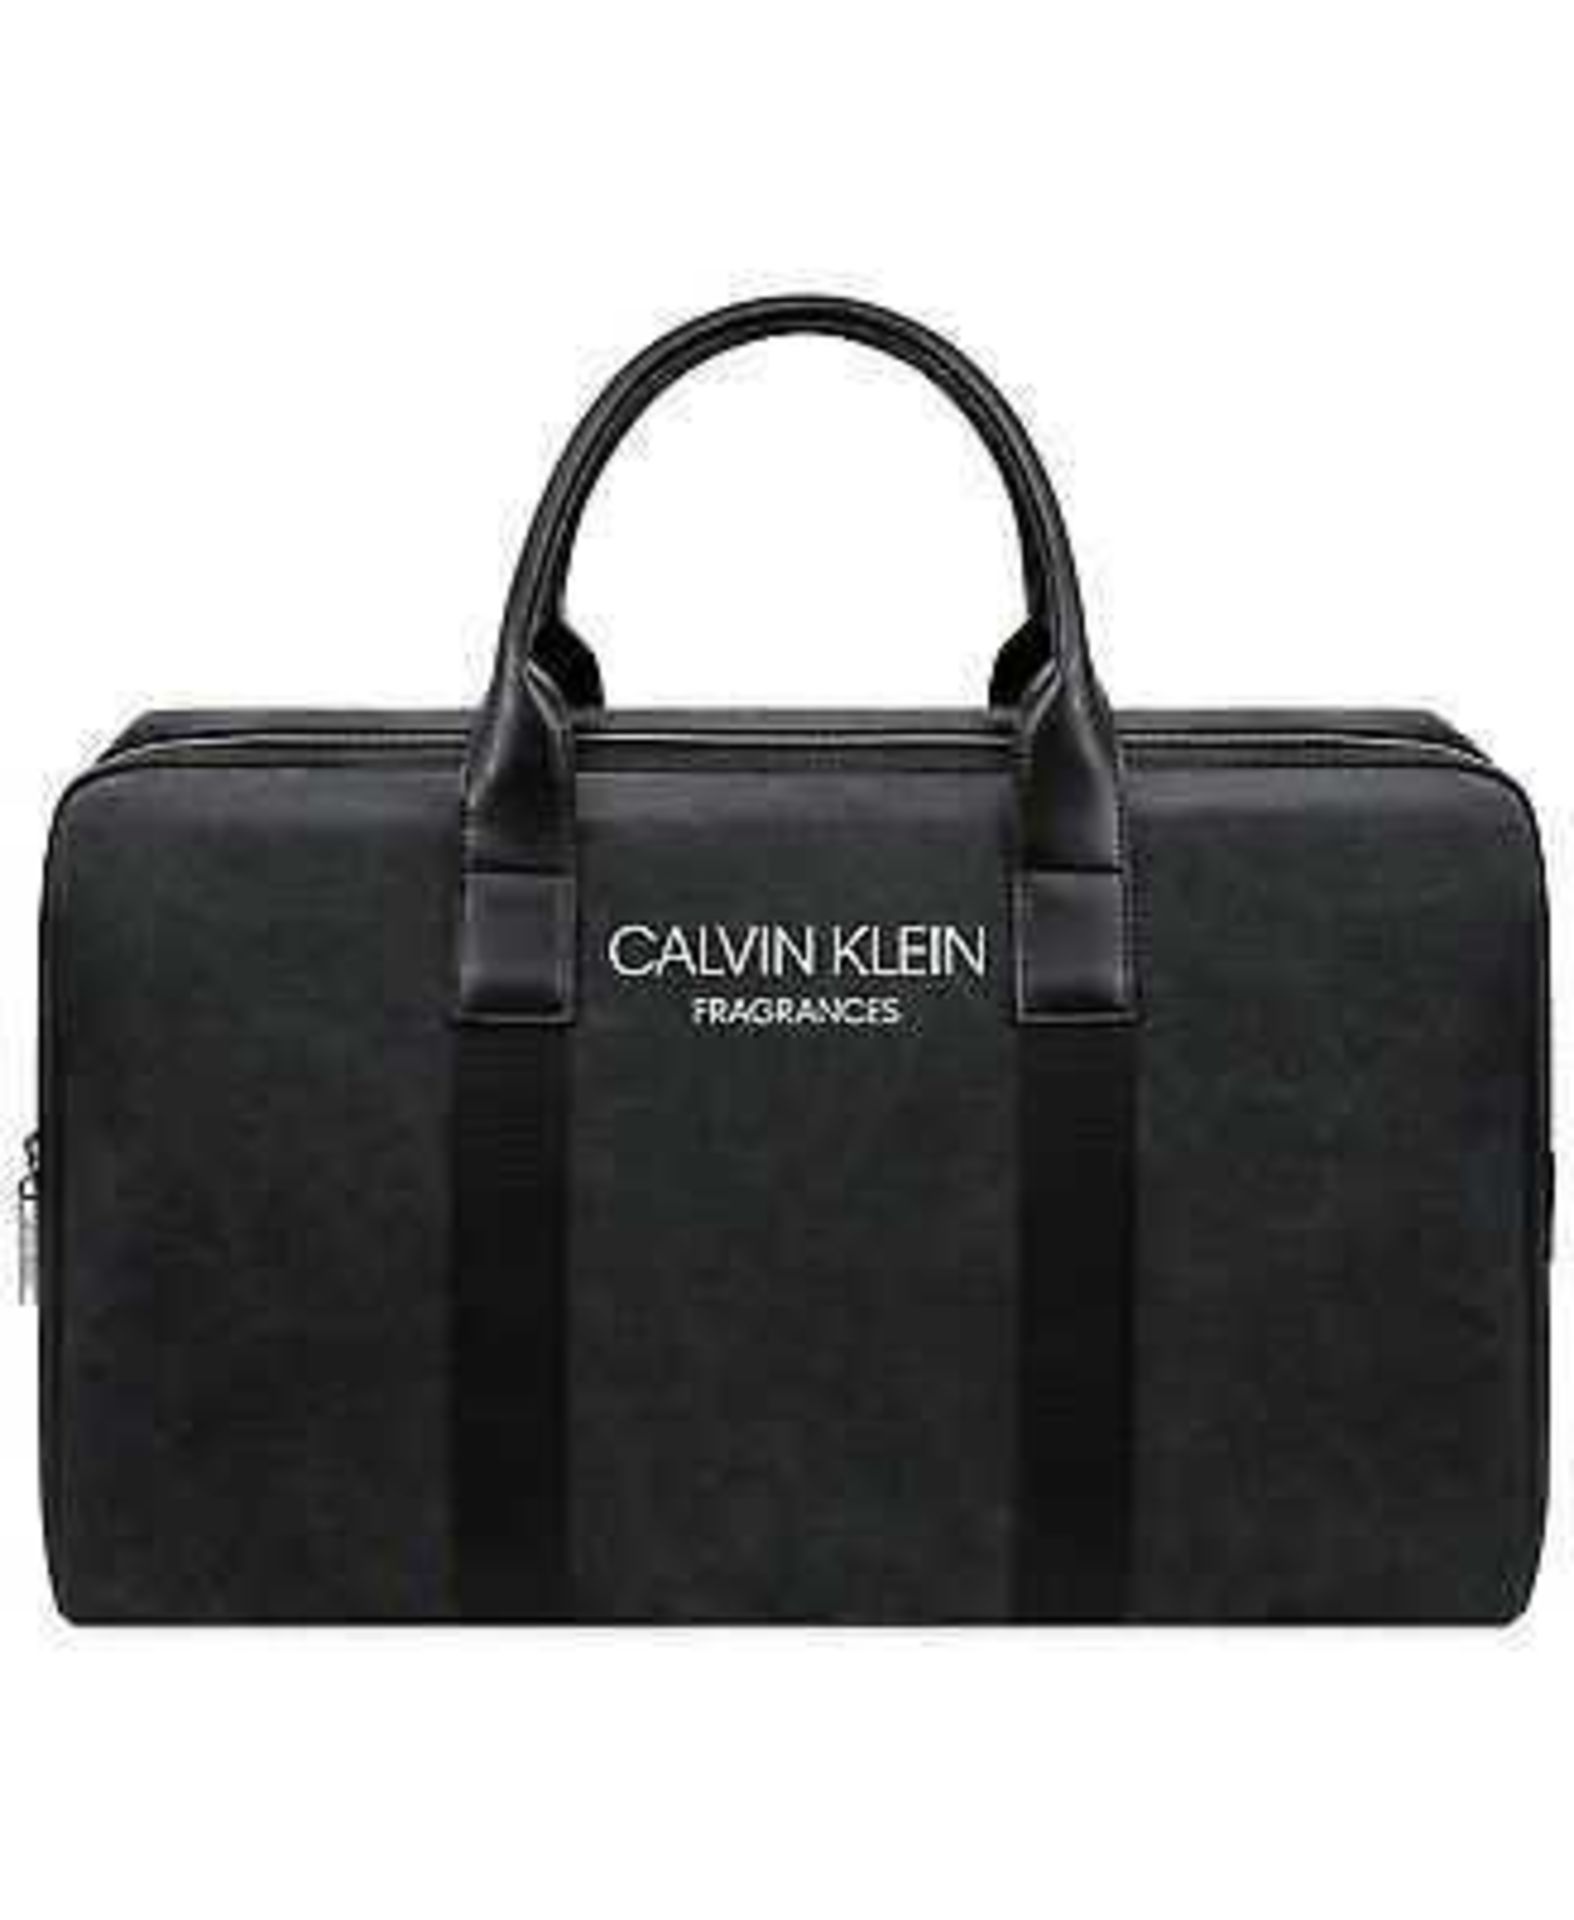 RRP £80 Grey Fabric Calvin Klein Duffle Bag With Leather Handles